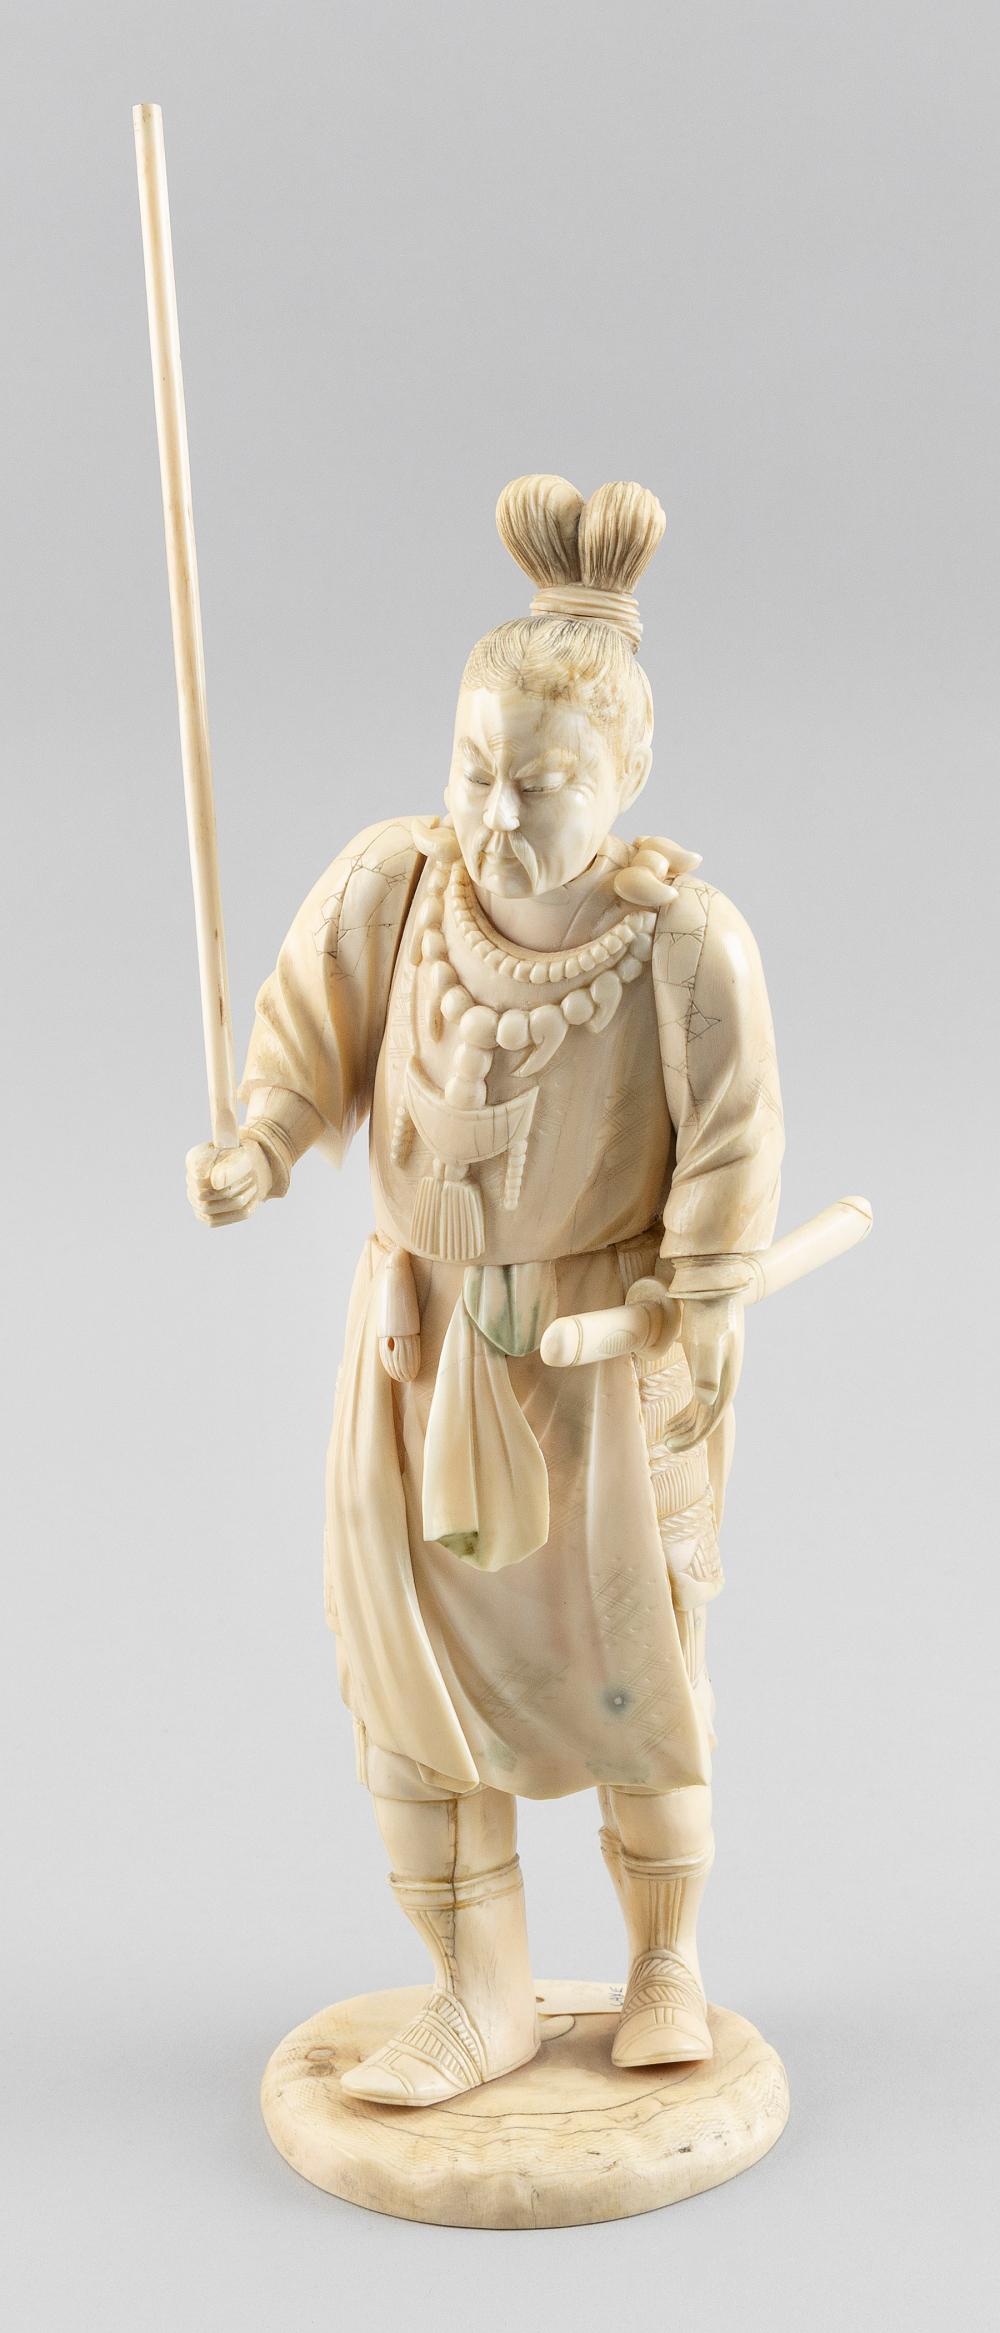 JAPANESE CARVED IVORY FIGURE OF A SAMURAI